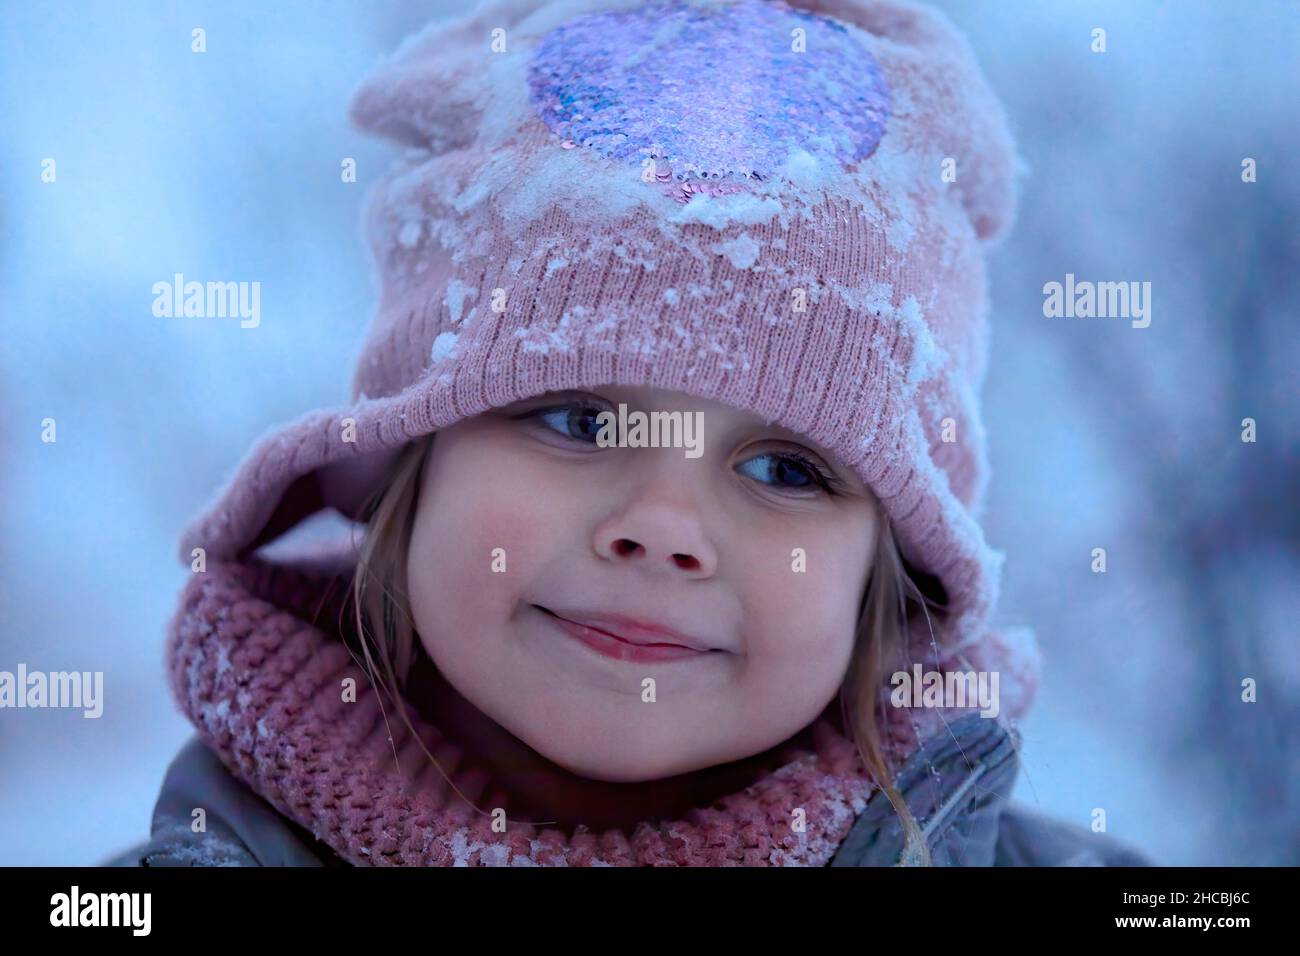 Cute smiling girl wearing knit hat with snow Stock Photo